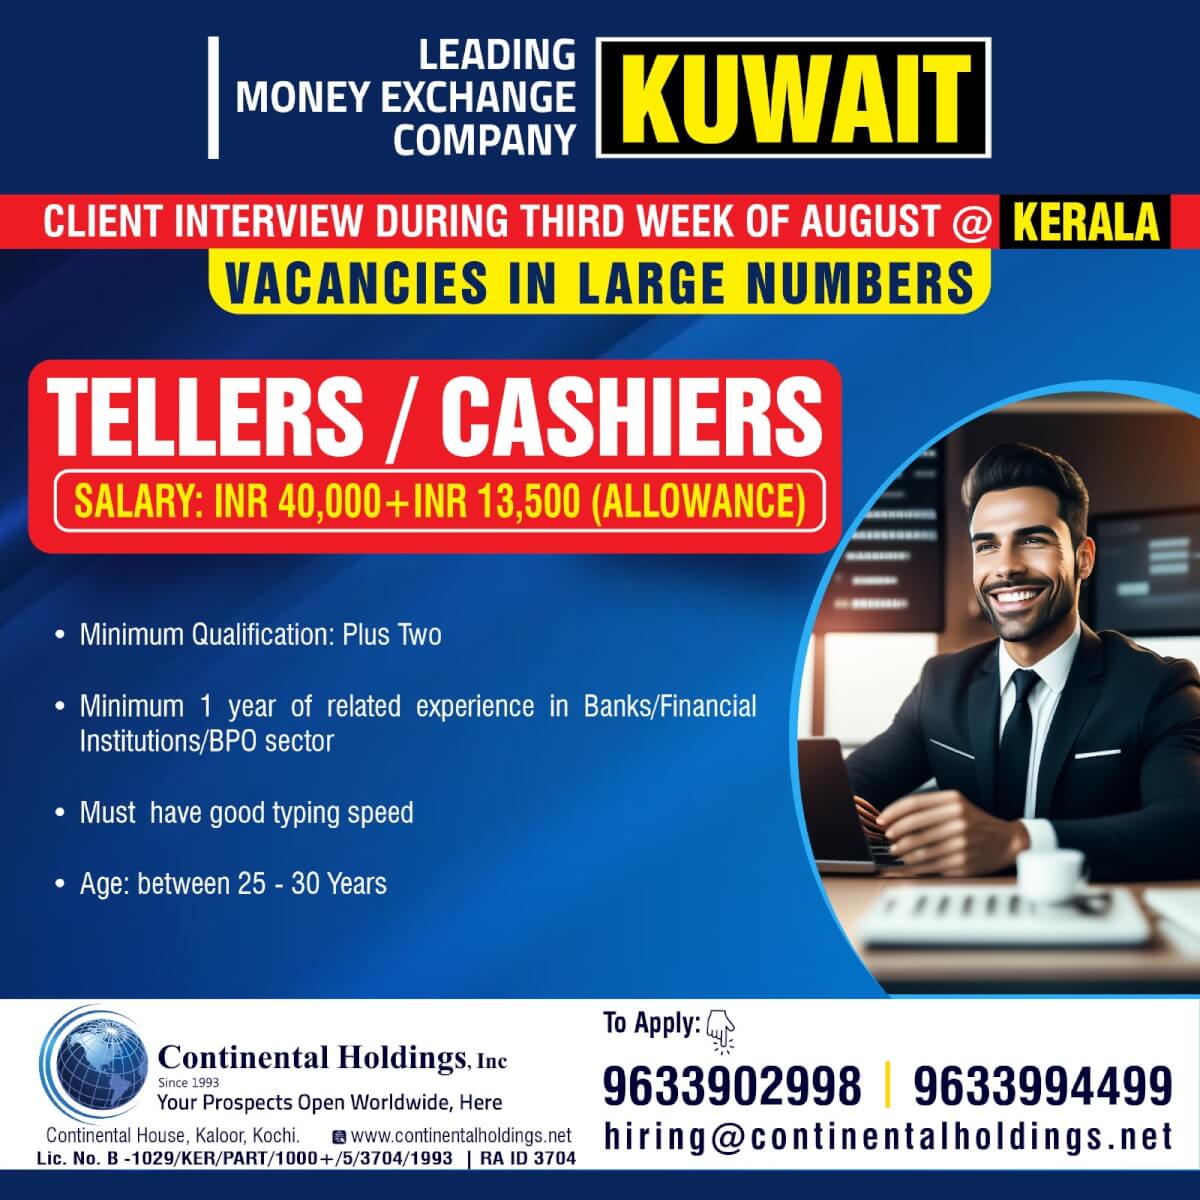 Hiring for Kuwait - Client Interview at Cochin